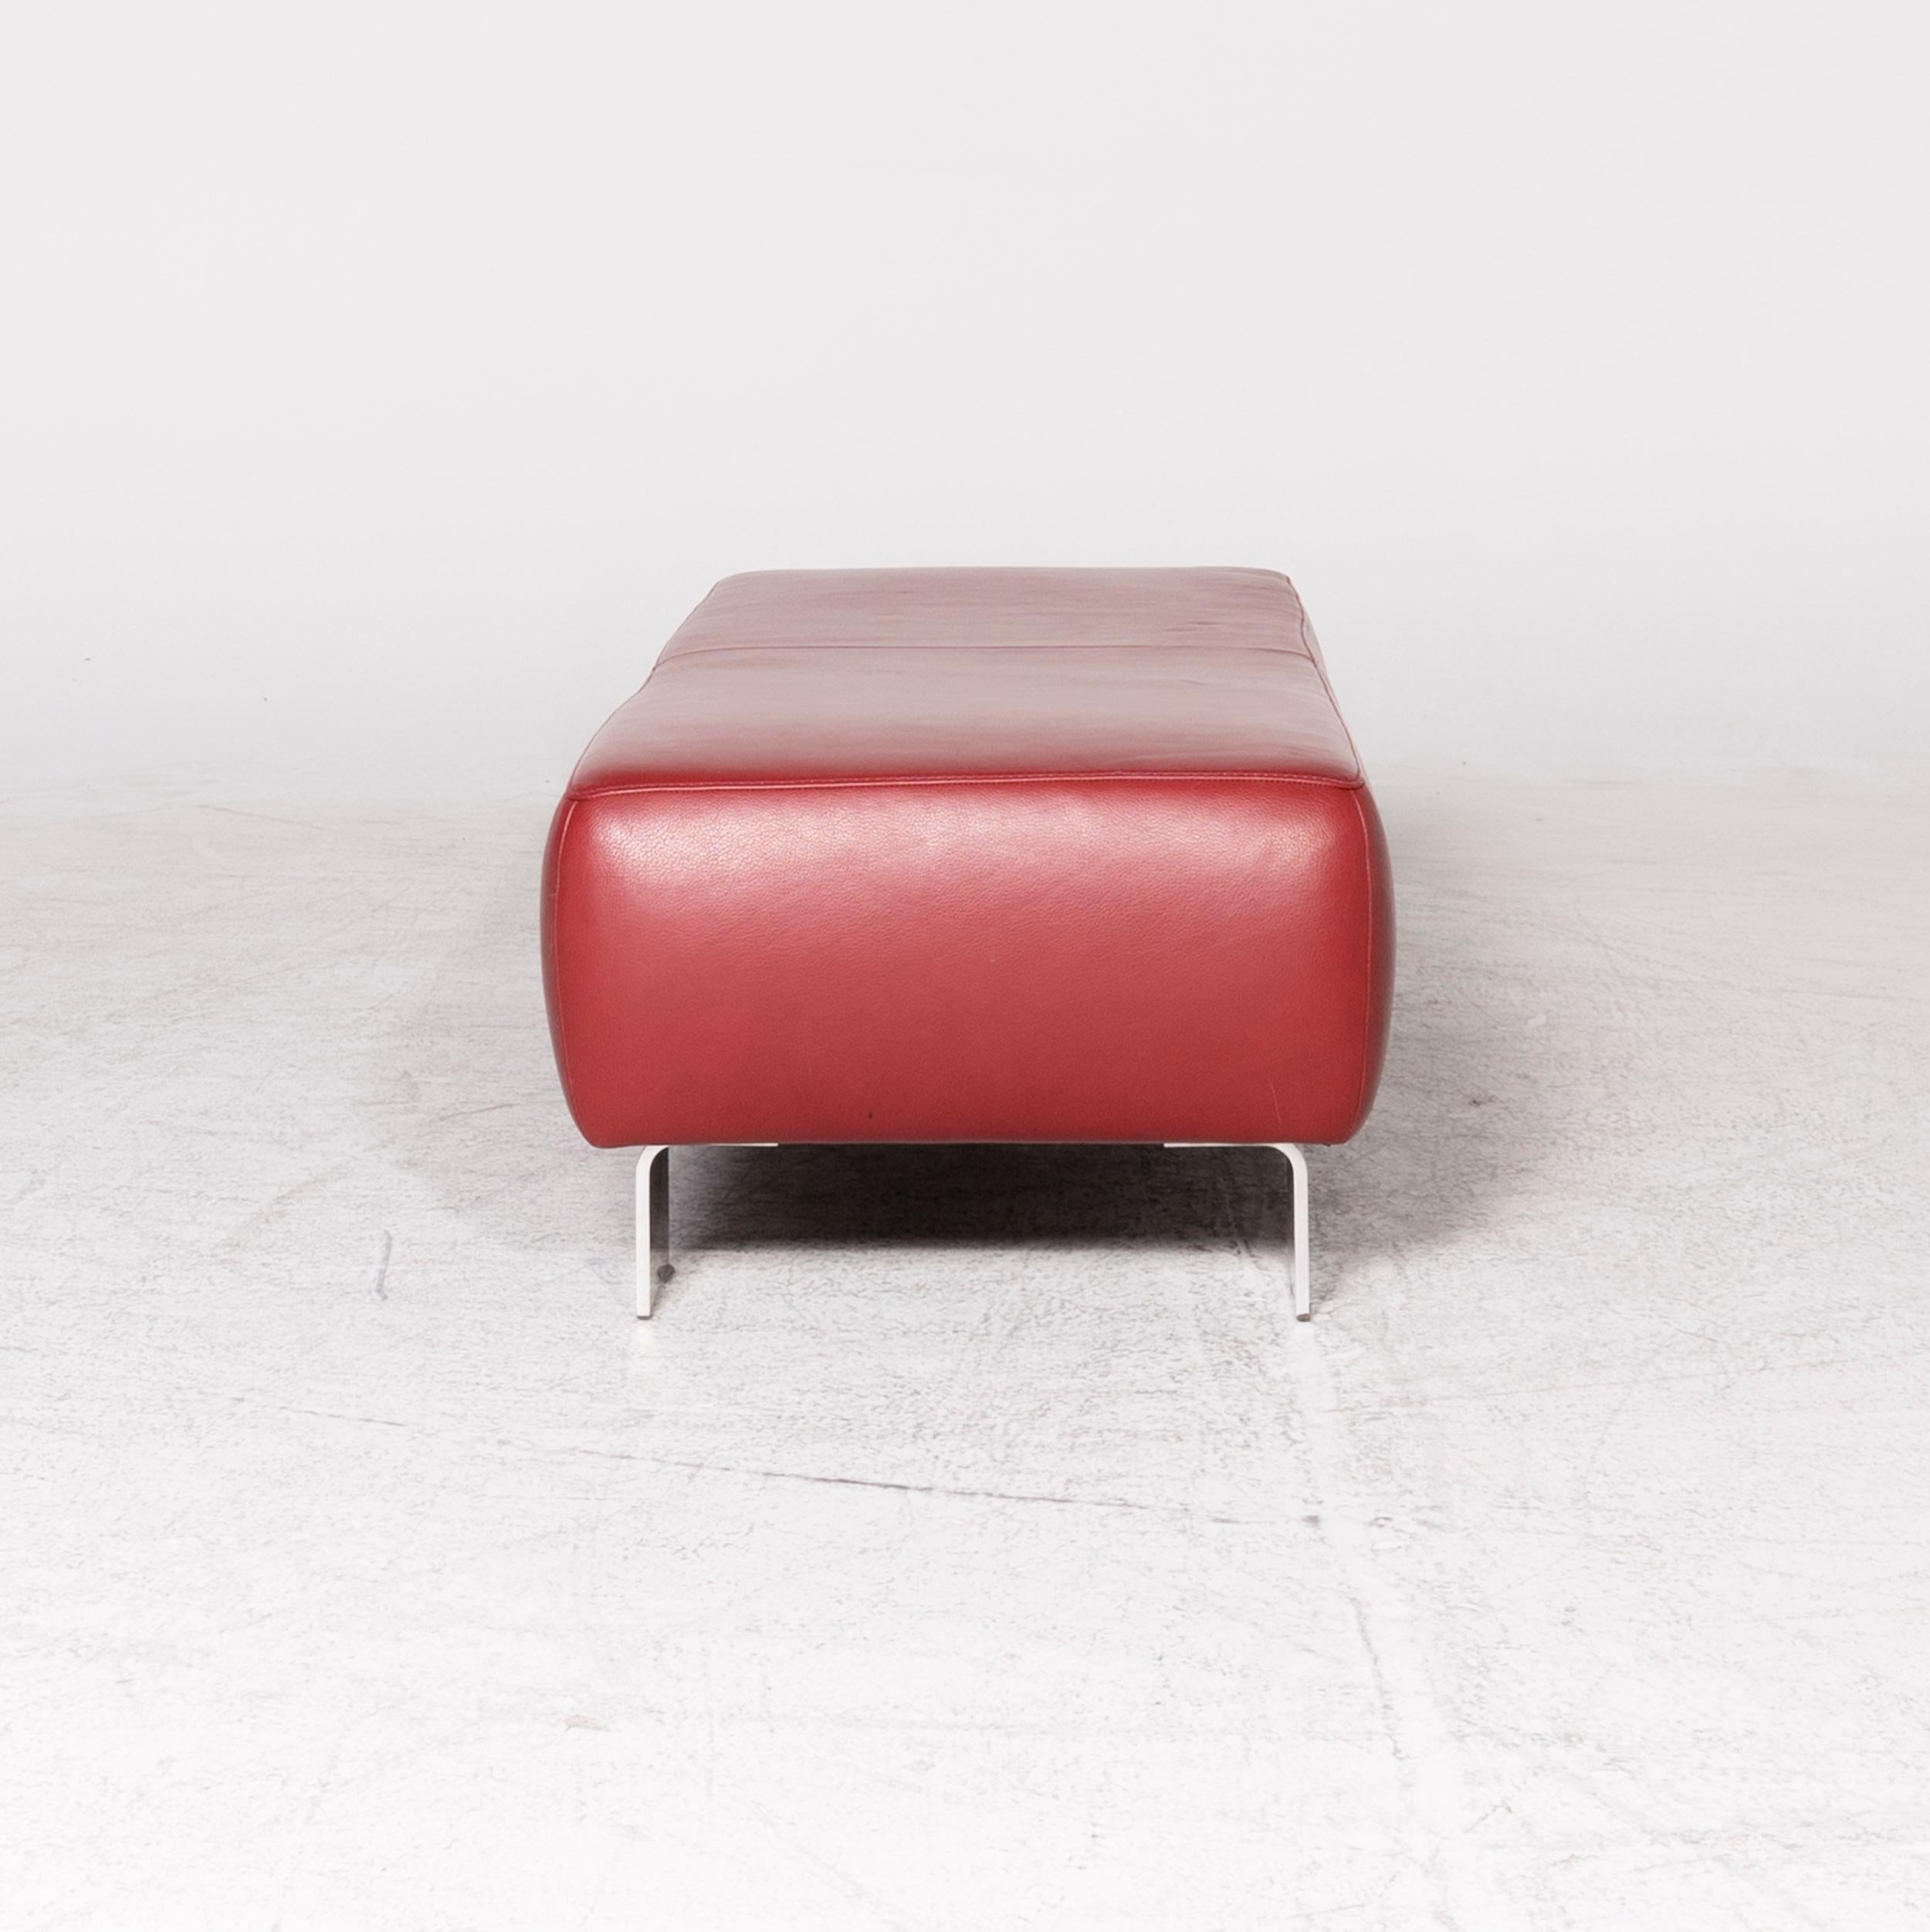 Willi Schillig Taboo Designer Leather Stool Red Genuine Leather Stool For Sale 4